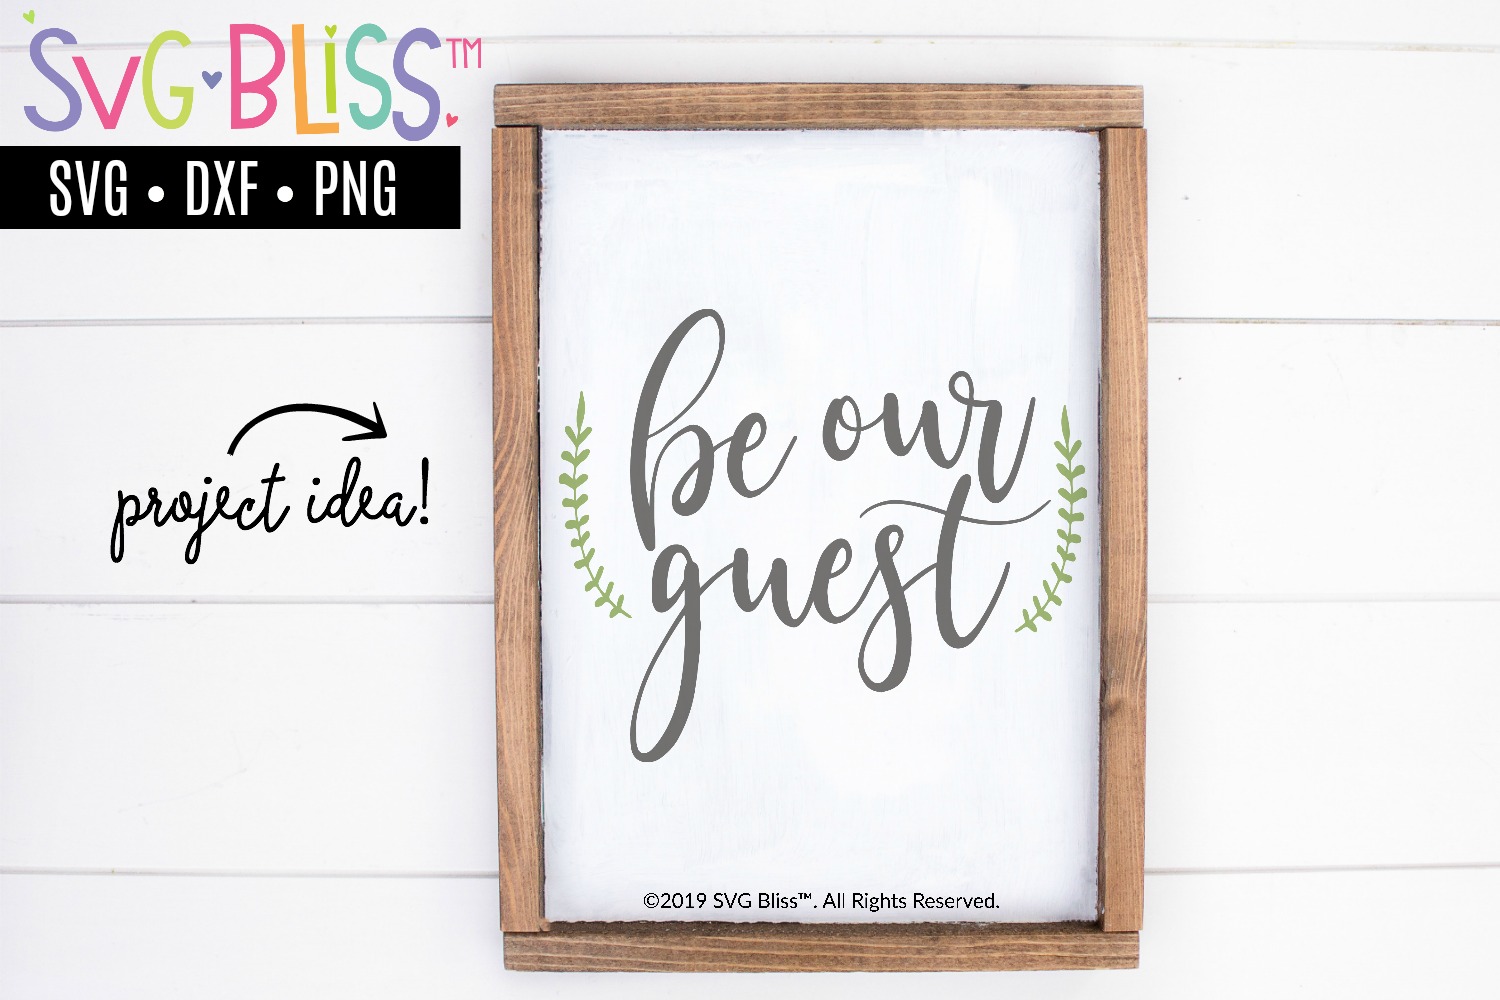 Download Be Our Guest- Home Decor Sign SVG Cut File (274631) | Cut ...